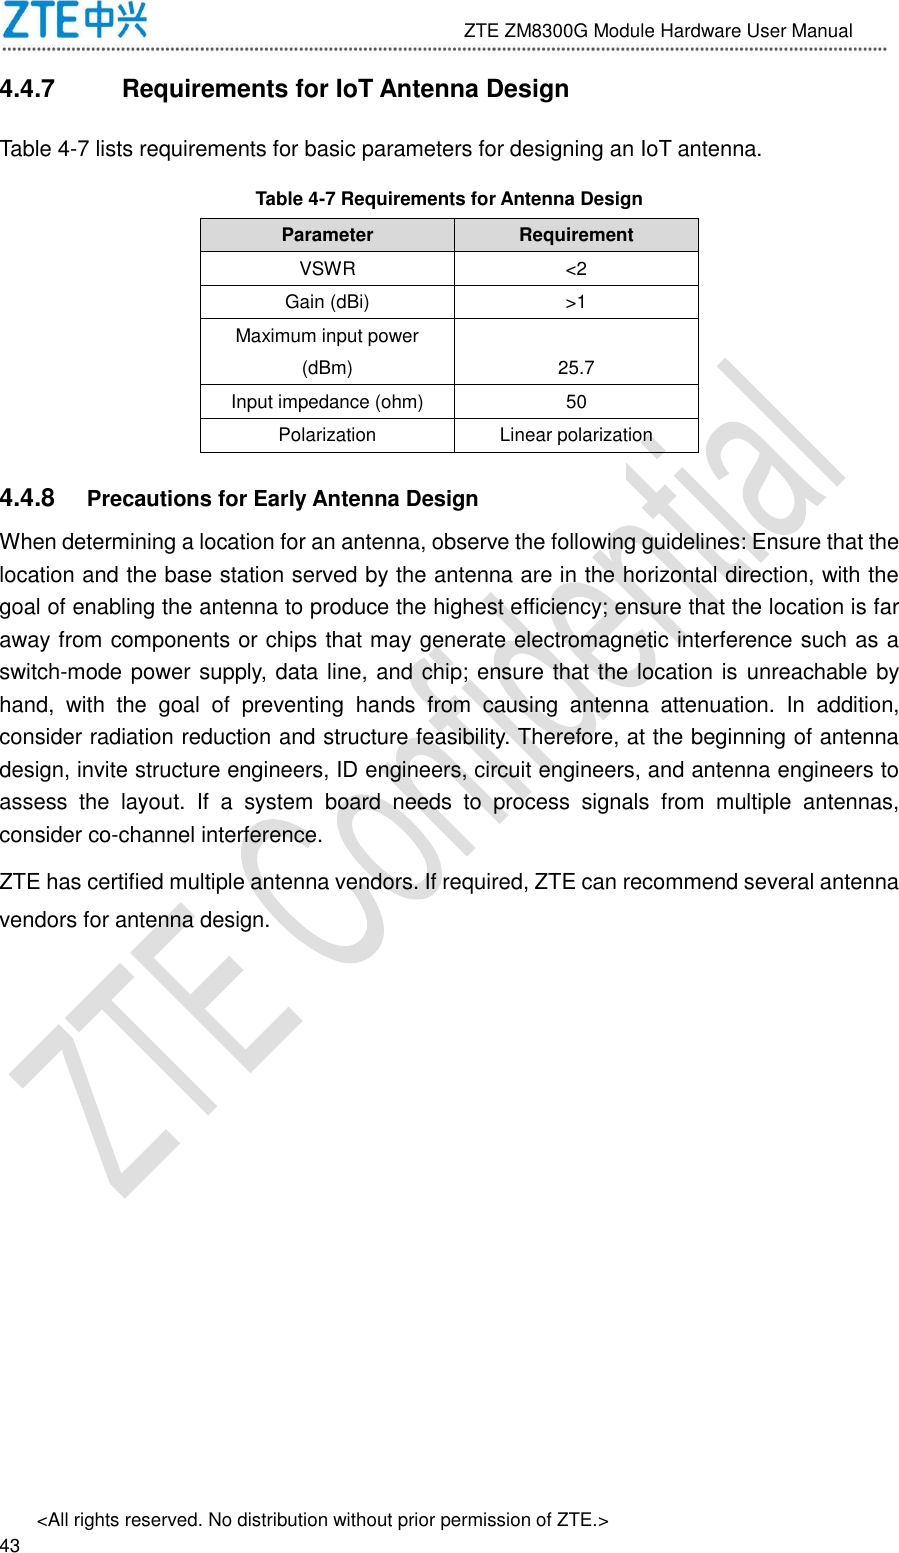                              ZTE ZM8300G Module Hardware User Manual &lt;All rights reserved. No distribution without prior permission of ZTE.&gt;                                                               43 4.4.7  Requirements for IoT Antenna Design Table 4-7 lists requirements for basic parameters for designing an IoT antenna. Table 4-7 Requirements for Antenna Design Parameter Requirement VSWR &lt;2 Gain (dBi) &gt;1 Maximum input power (dBm) 25.7 Input impedance (ohm) 50 Polarization Linear polarization 4.4.8  Precautions for Early Antenna Design When determining a location for an antenna, observe the following guidelines: Ensure that the location and the base station served by the antenna are in the horizontal direction, with the goal of enabling the antenna to produce the highest efficiency; ensure that the location is far away from components or chips that may generate electromagnetic interference such as a switch-mode power supply, data line, and chip; ensure that the location is unreachable by hand,  with  the  goal  of  preventing  hands  from  causing  antenna  attenuation.  In  addition, consider radiation reduction and structure feasibility. Therefore, at the beginning of antenna design, invite structure engineers, ID engineers, circuit engineers, and antenna engineers to assess  the  layout.  If  a  system  board  needs  to  process  signals  from  multiple  antennas, consider co-channel interference. ZTE has certified multiple antenna vendors. If required, ZTE can recommend several antenna vendors for antenna design.  